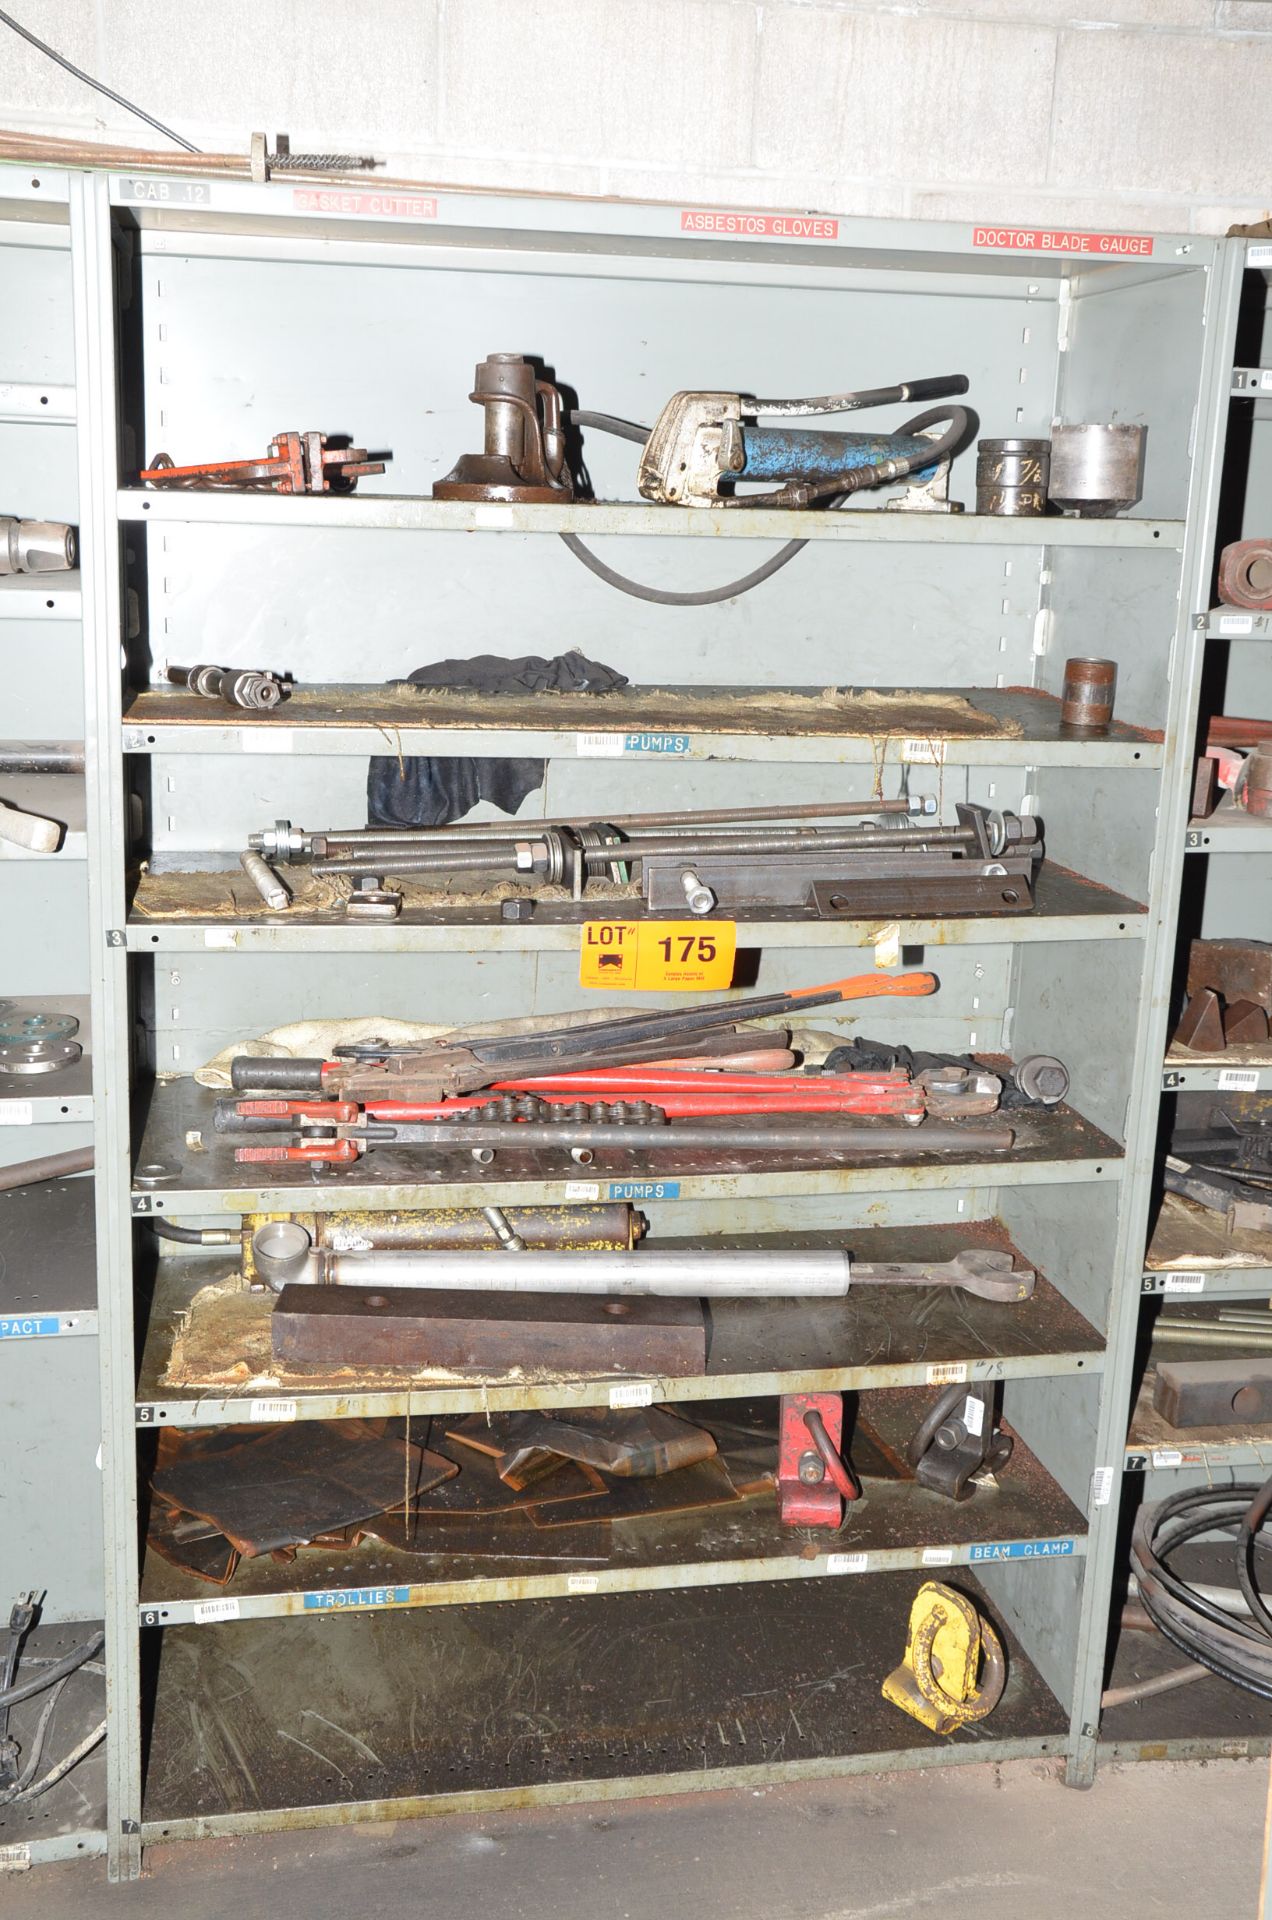 LOT/ CONTENTS OF SHELF - INCLUDING HYDRAULIC PUMPS, BOLT CUTTERS, STRAPPING TOOLS, PIPE CUTTERS [